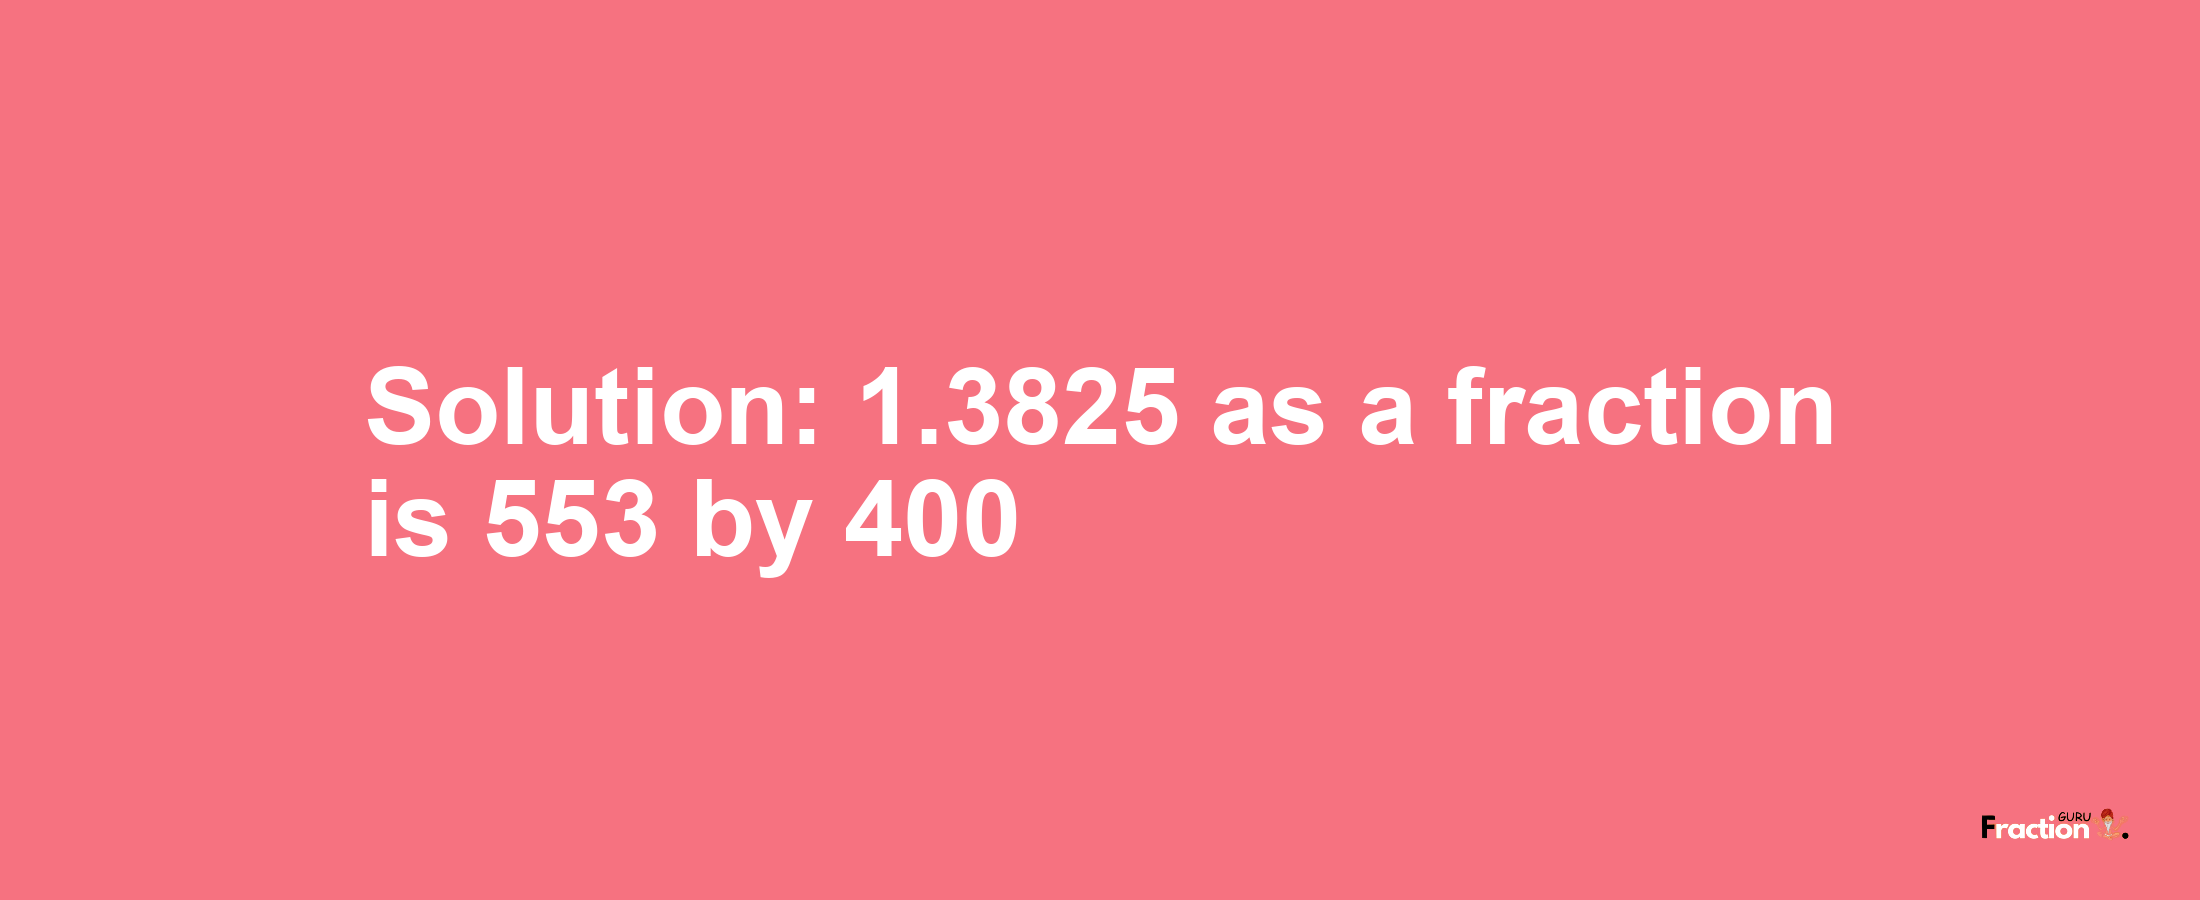 Solution:1.3825 as a fraction is 553/400